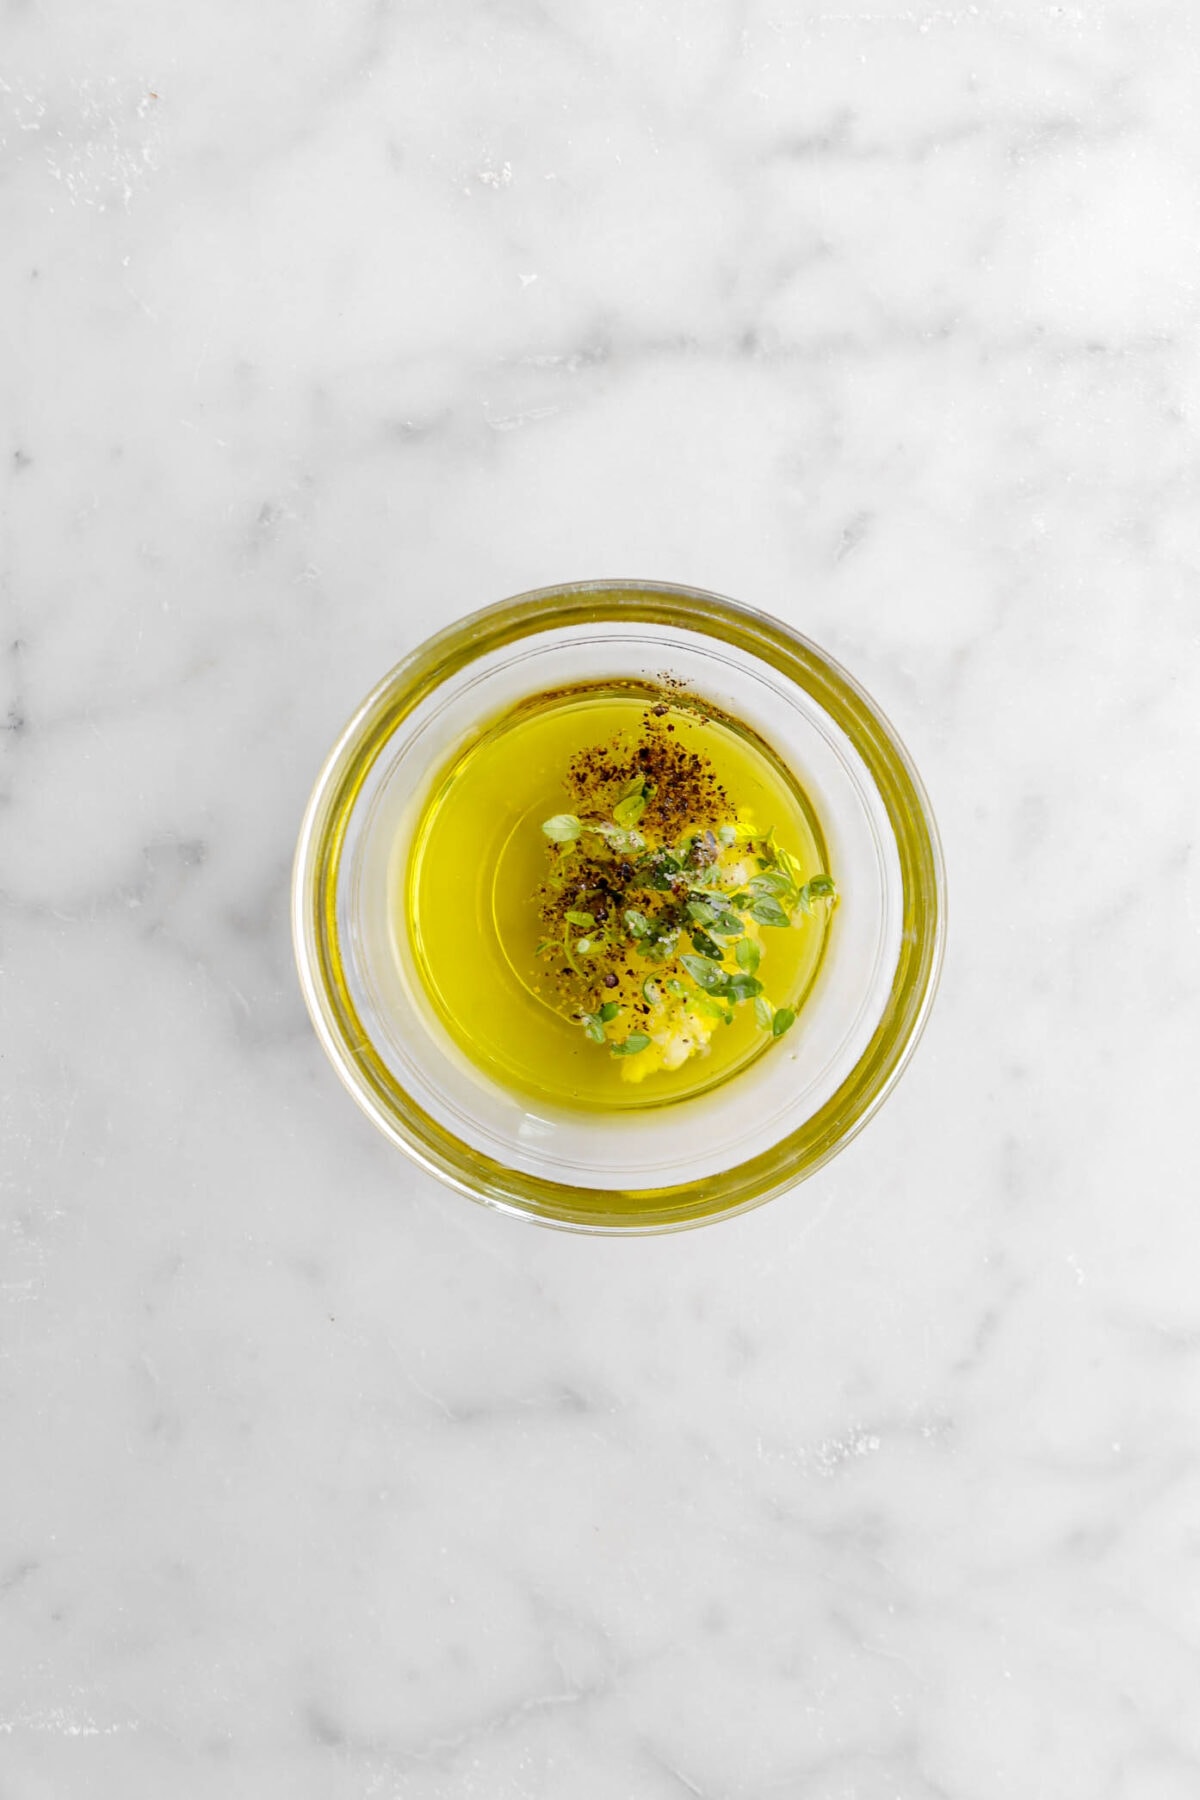 olive oil, garlic, thyme, and pepper in glass bowl